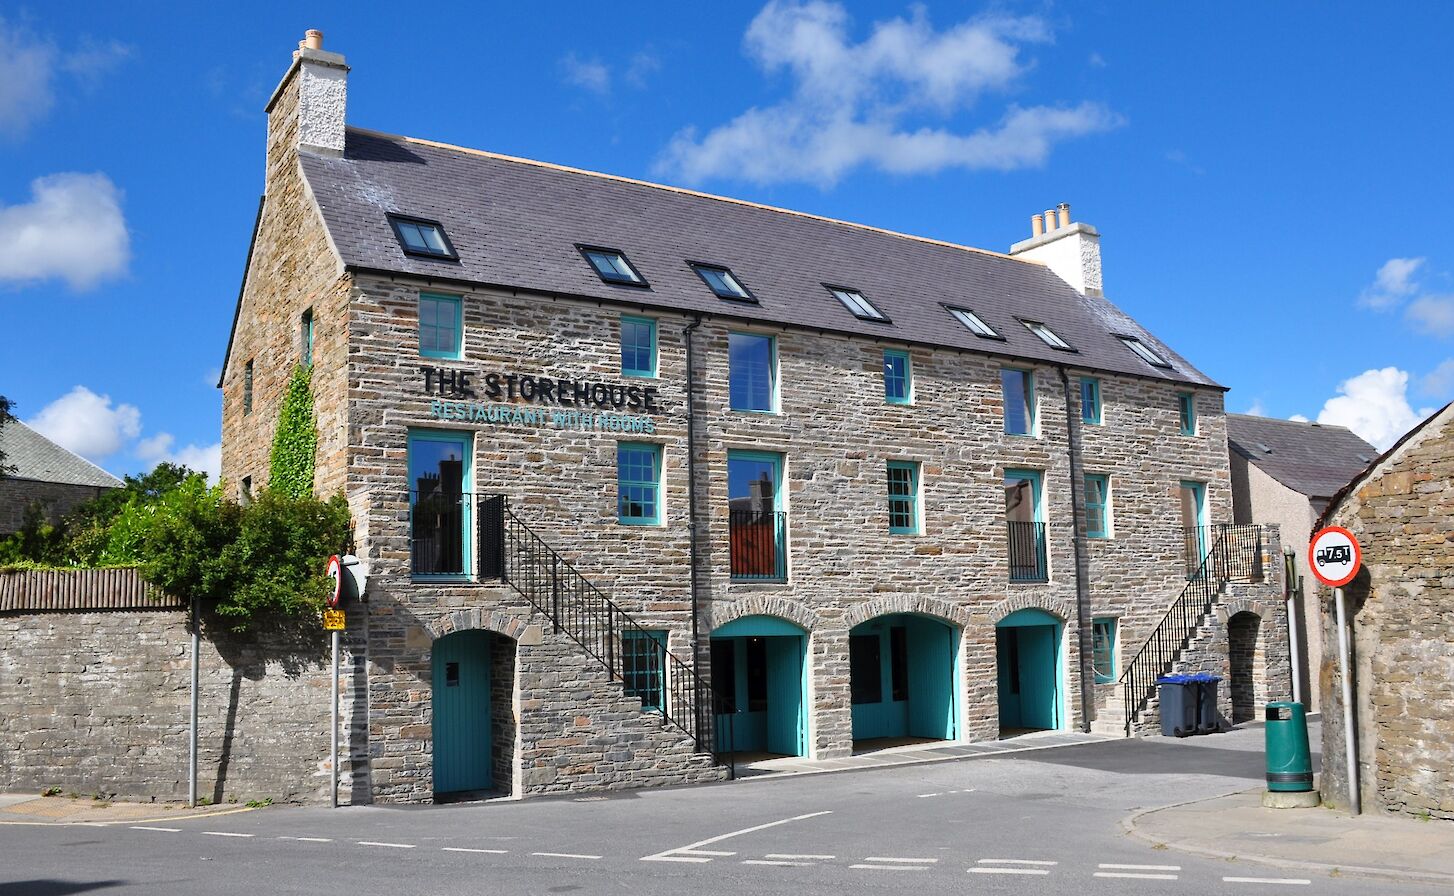 The Storehouse, Kirkwall - image by Leslie Burgher